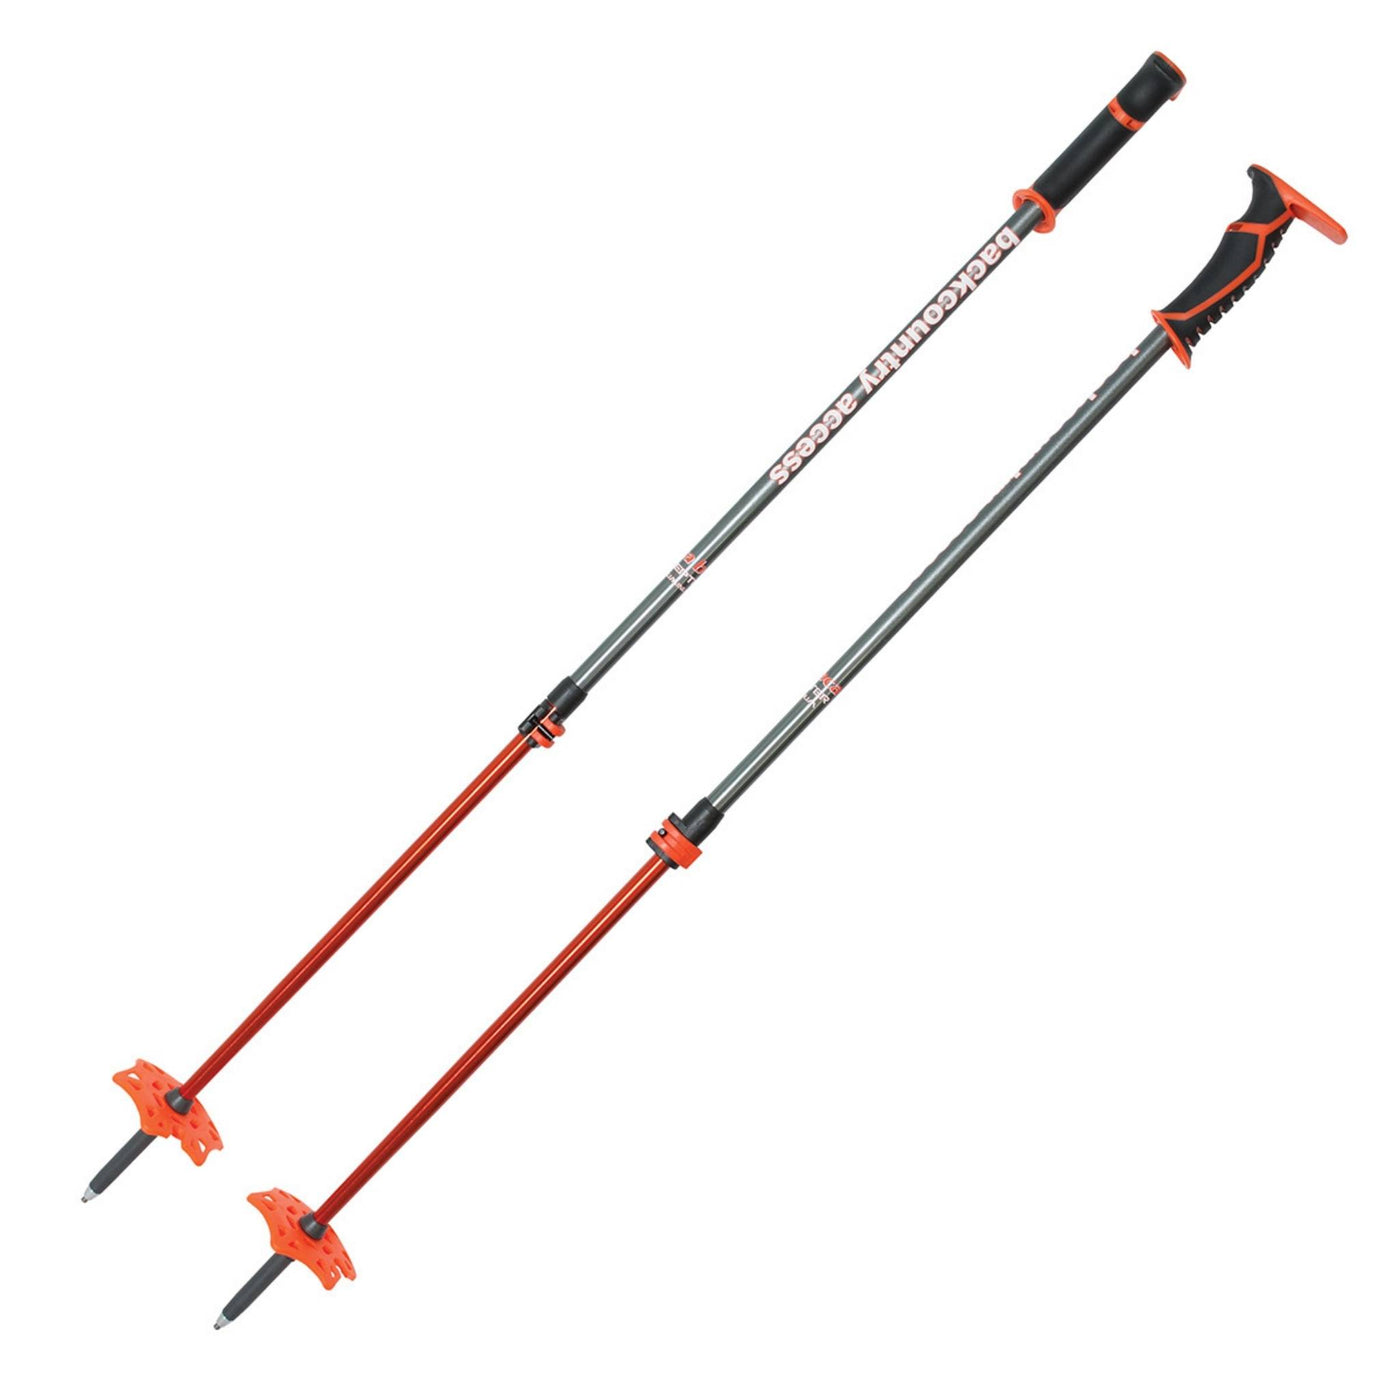 Backcountry Access Scepter Aluminium Pole | Ski Touring Poles  | Further Faster Christchurch NZ